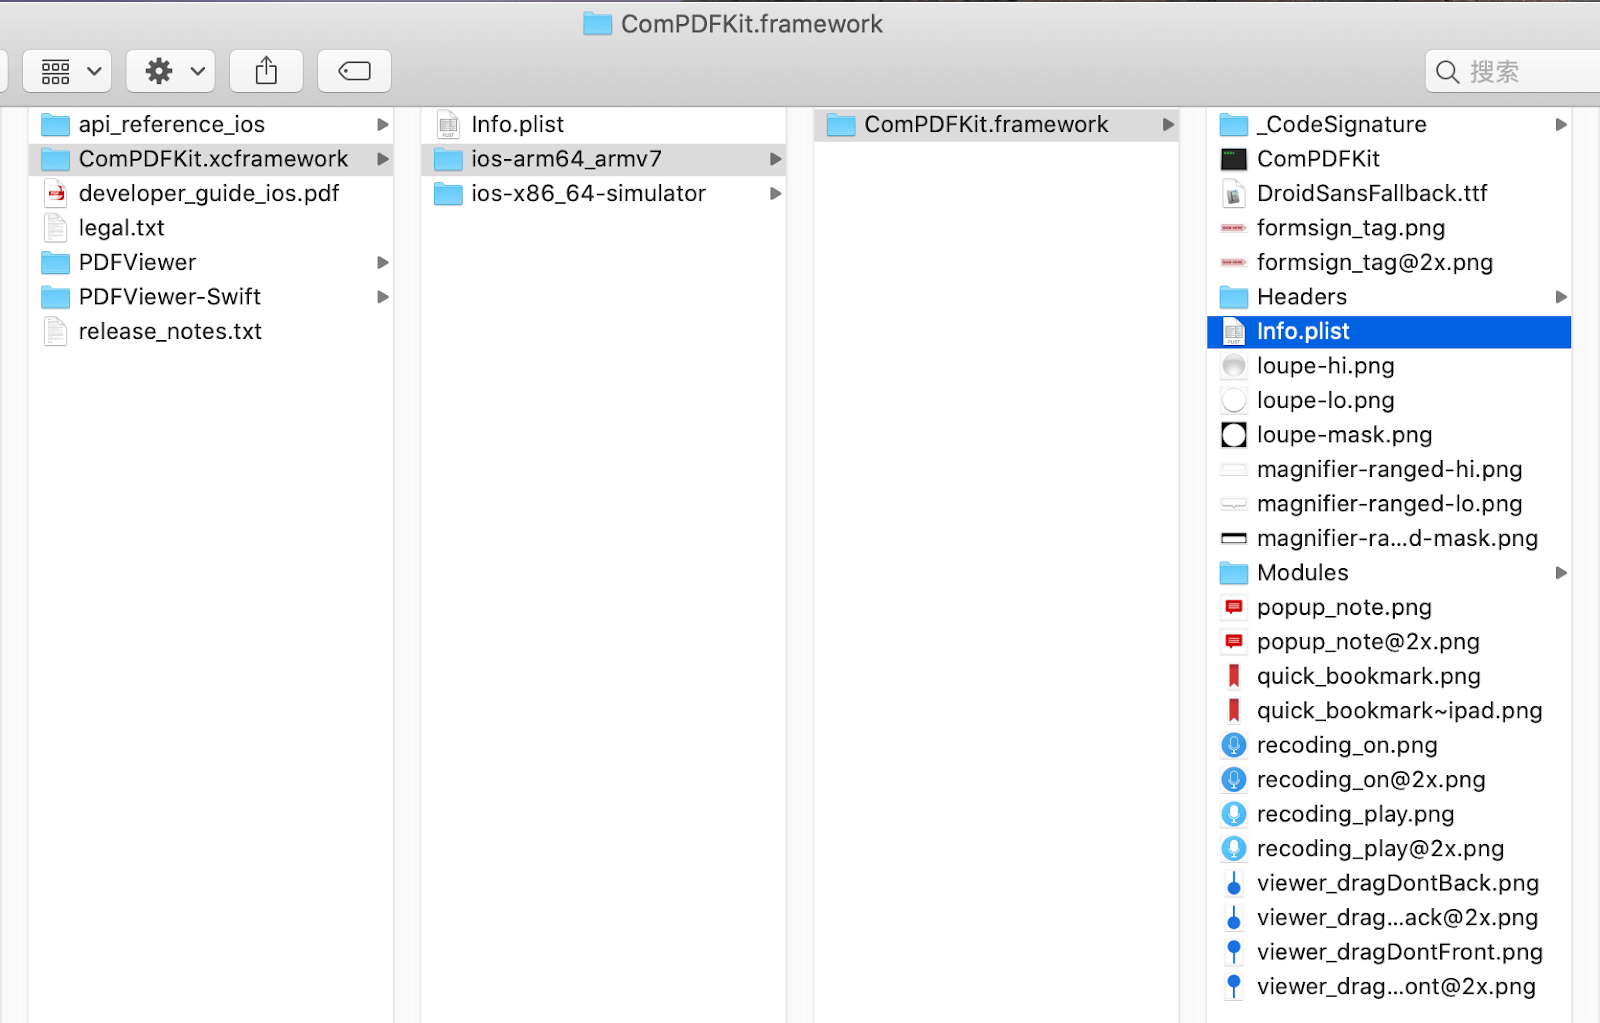 Find the versions of ComPDFKit PDF SDK